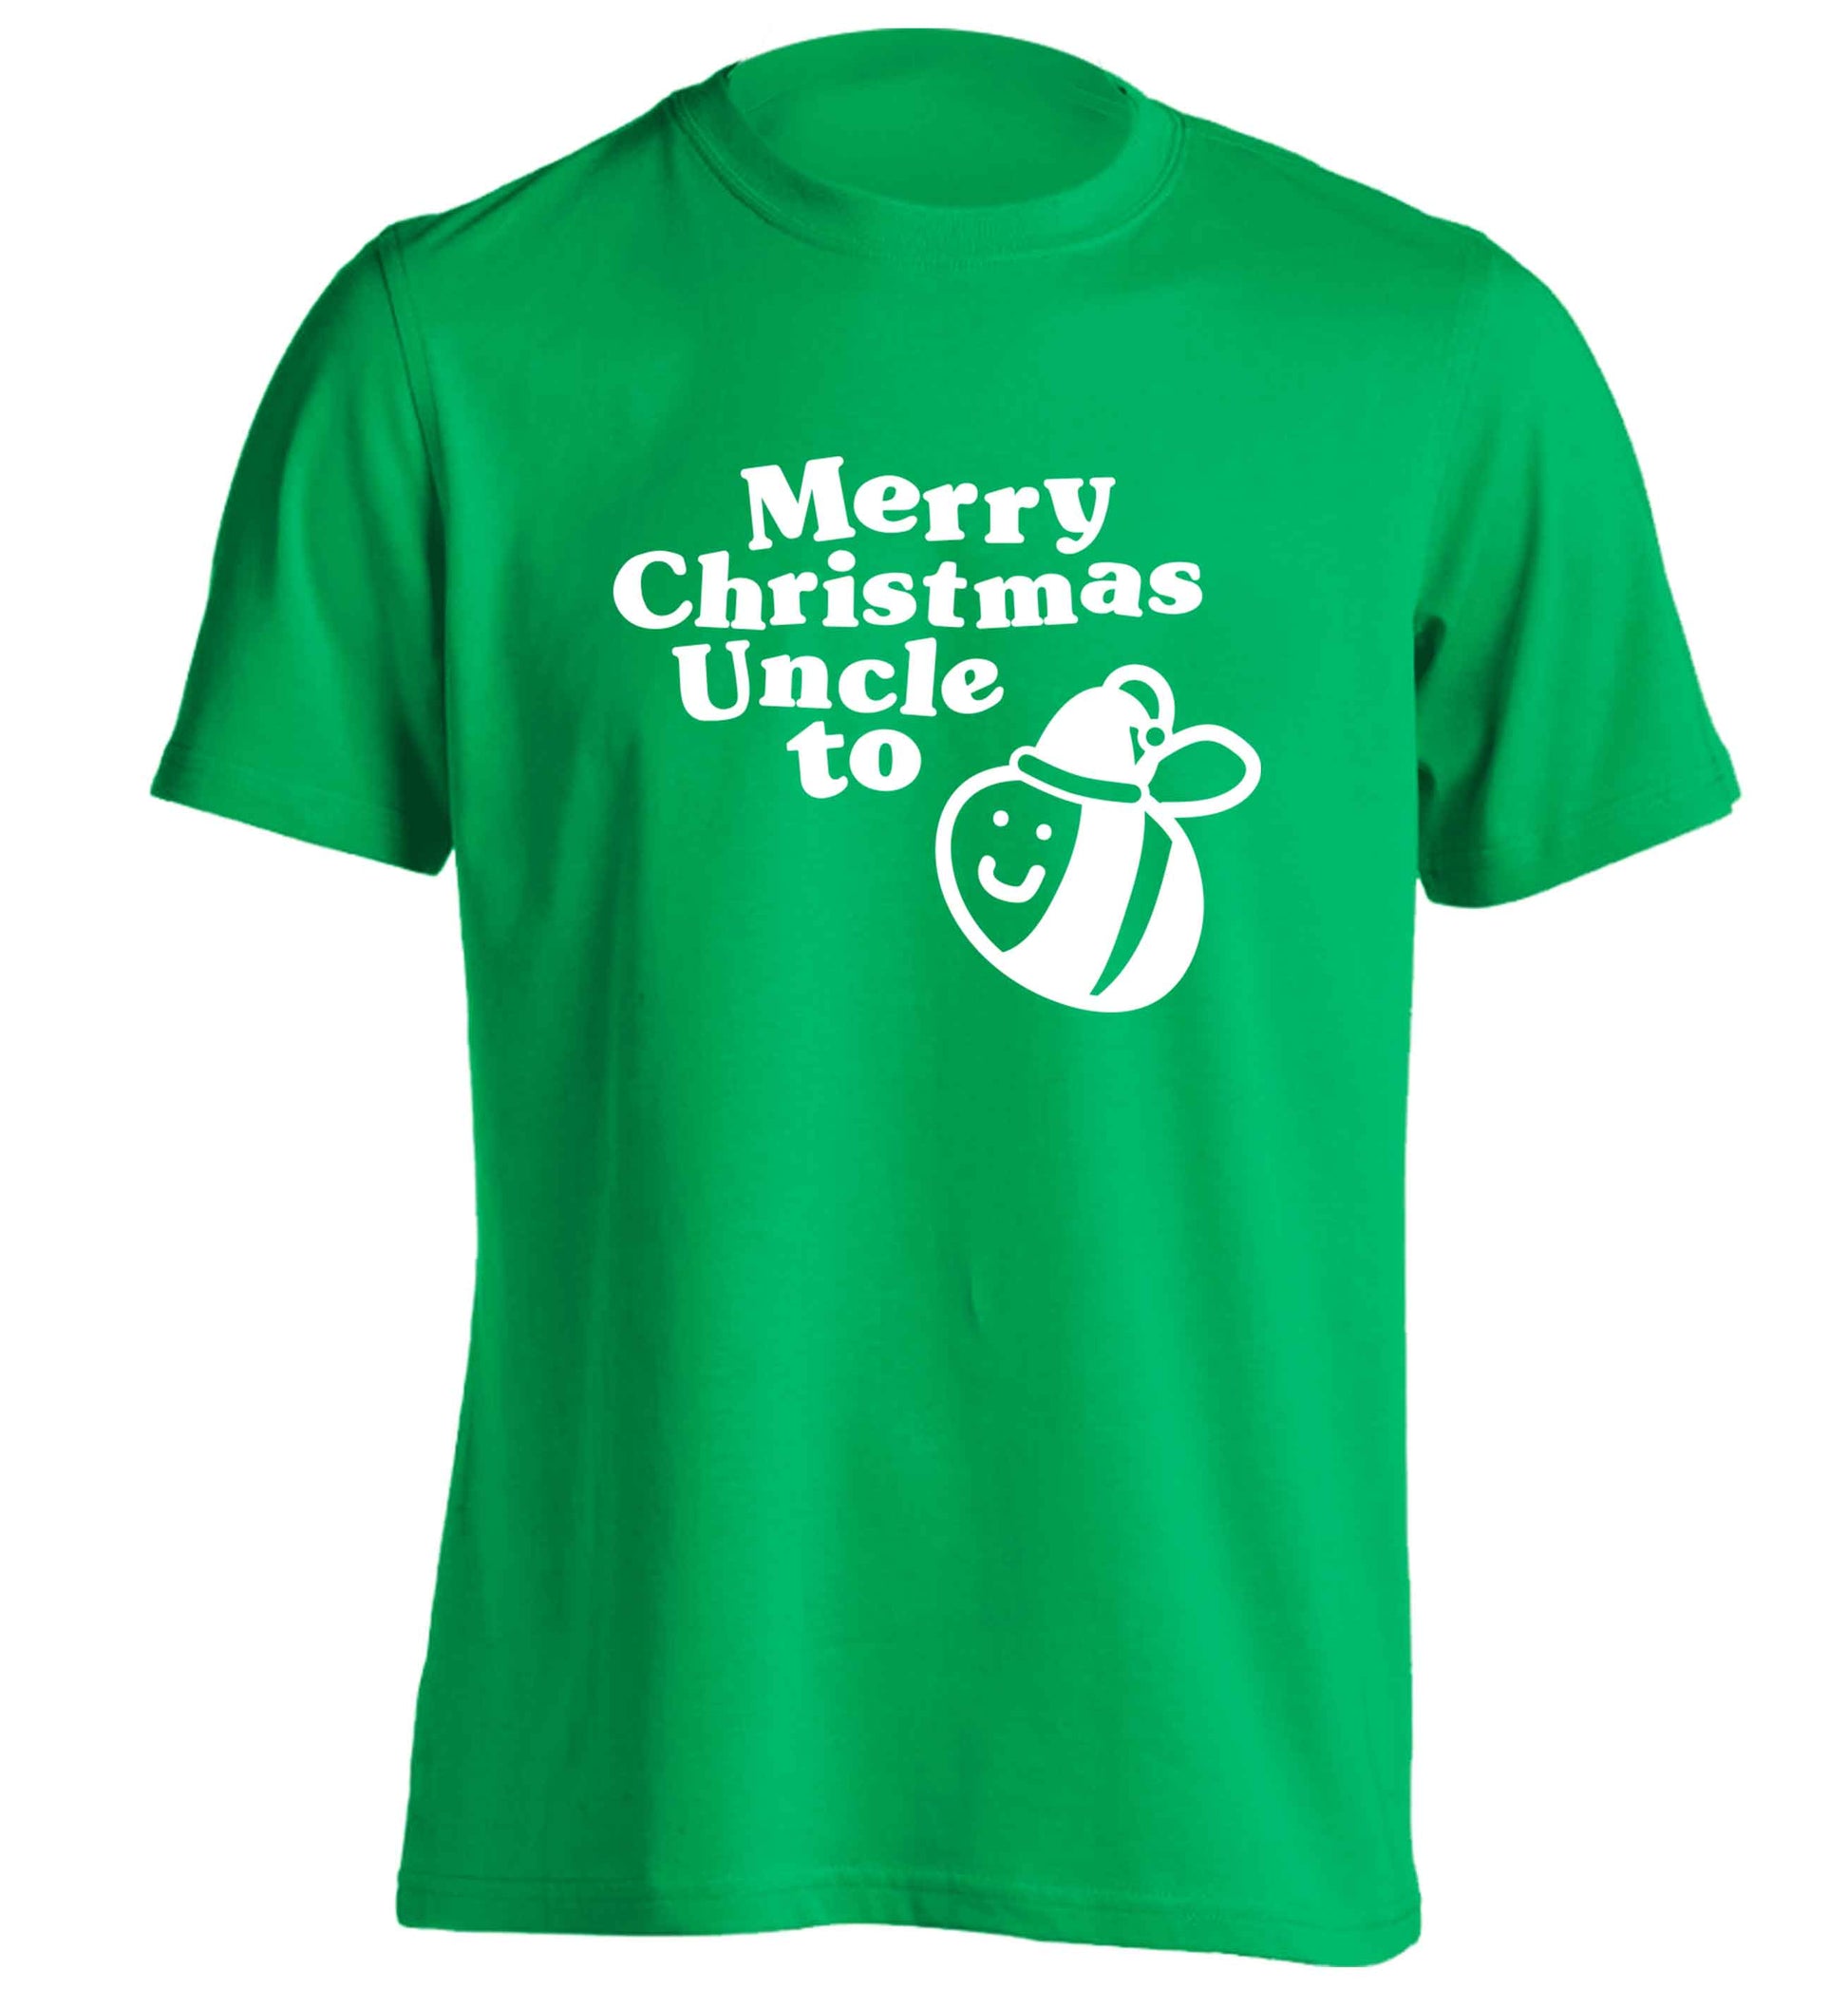 Merry Christmas uncle to be adults unisex green Tshirt 2XL